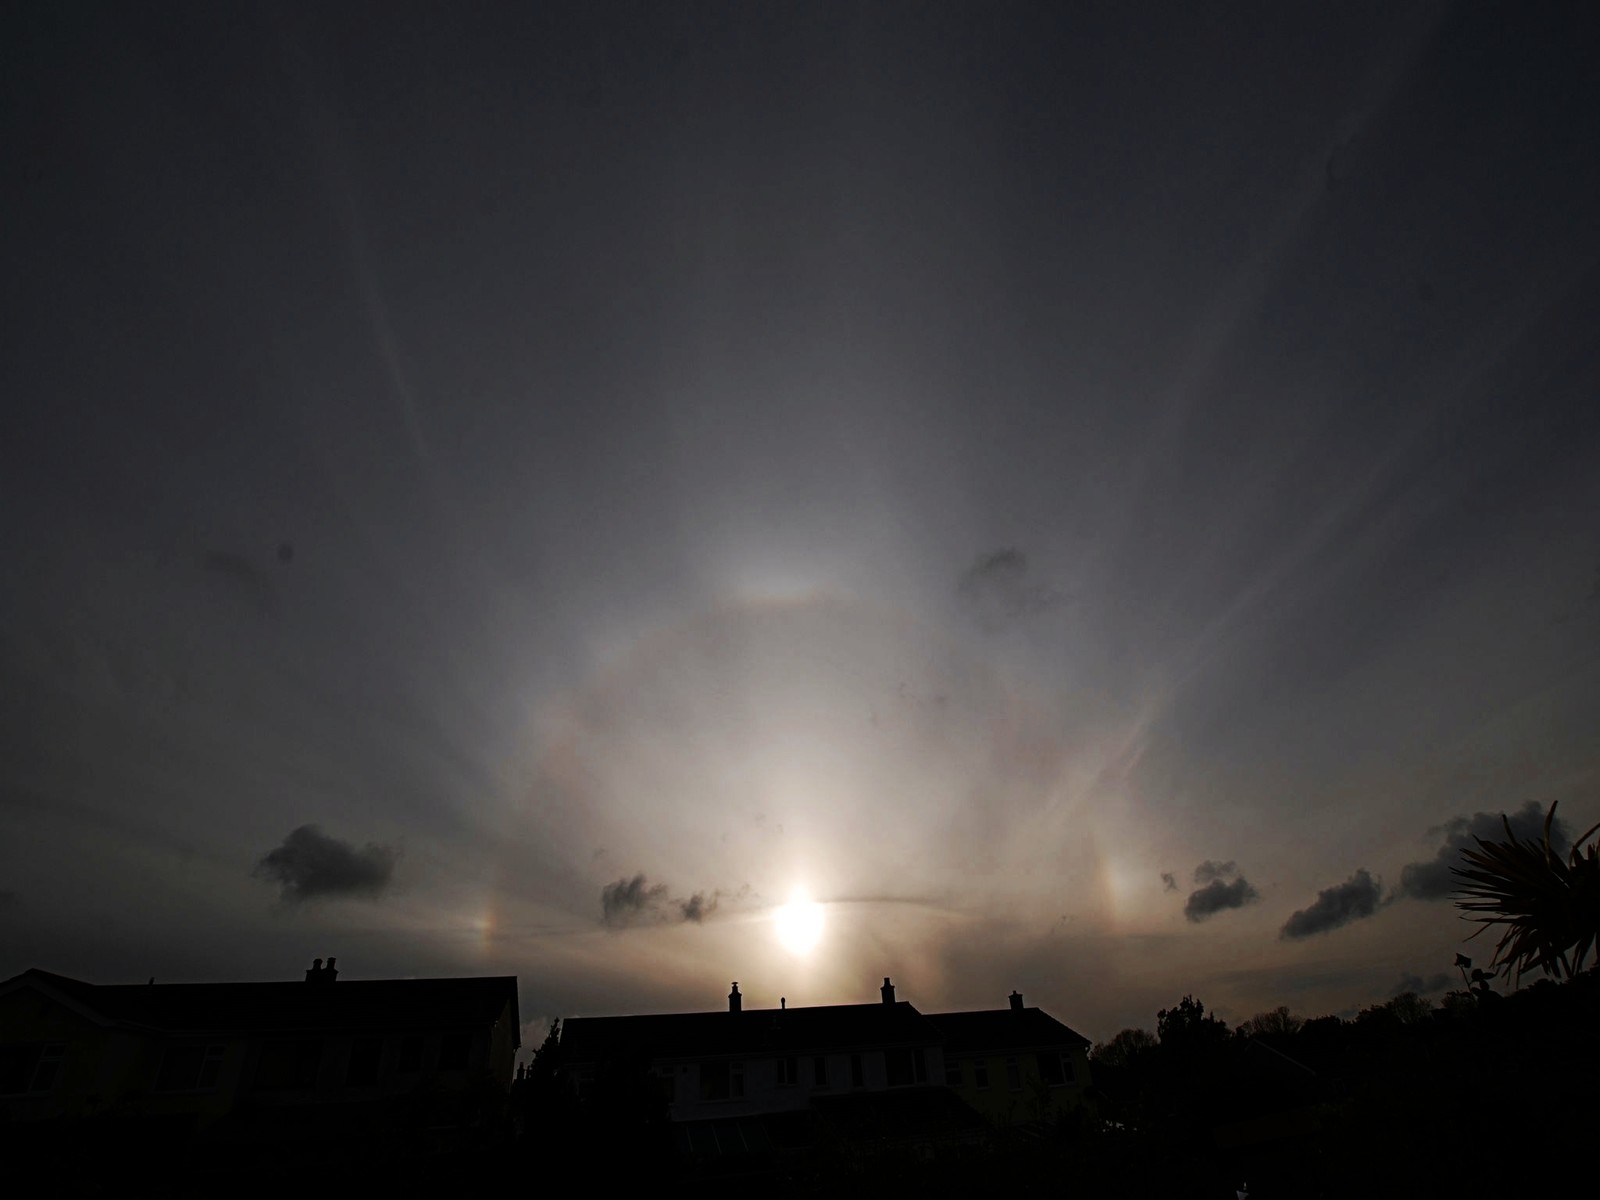 Veil of Cirrostratus and a weak halo